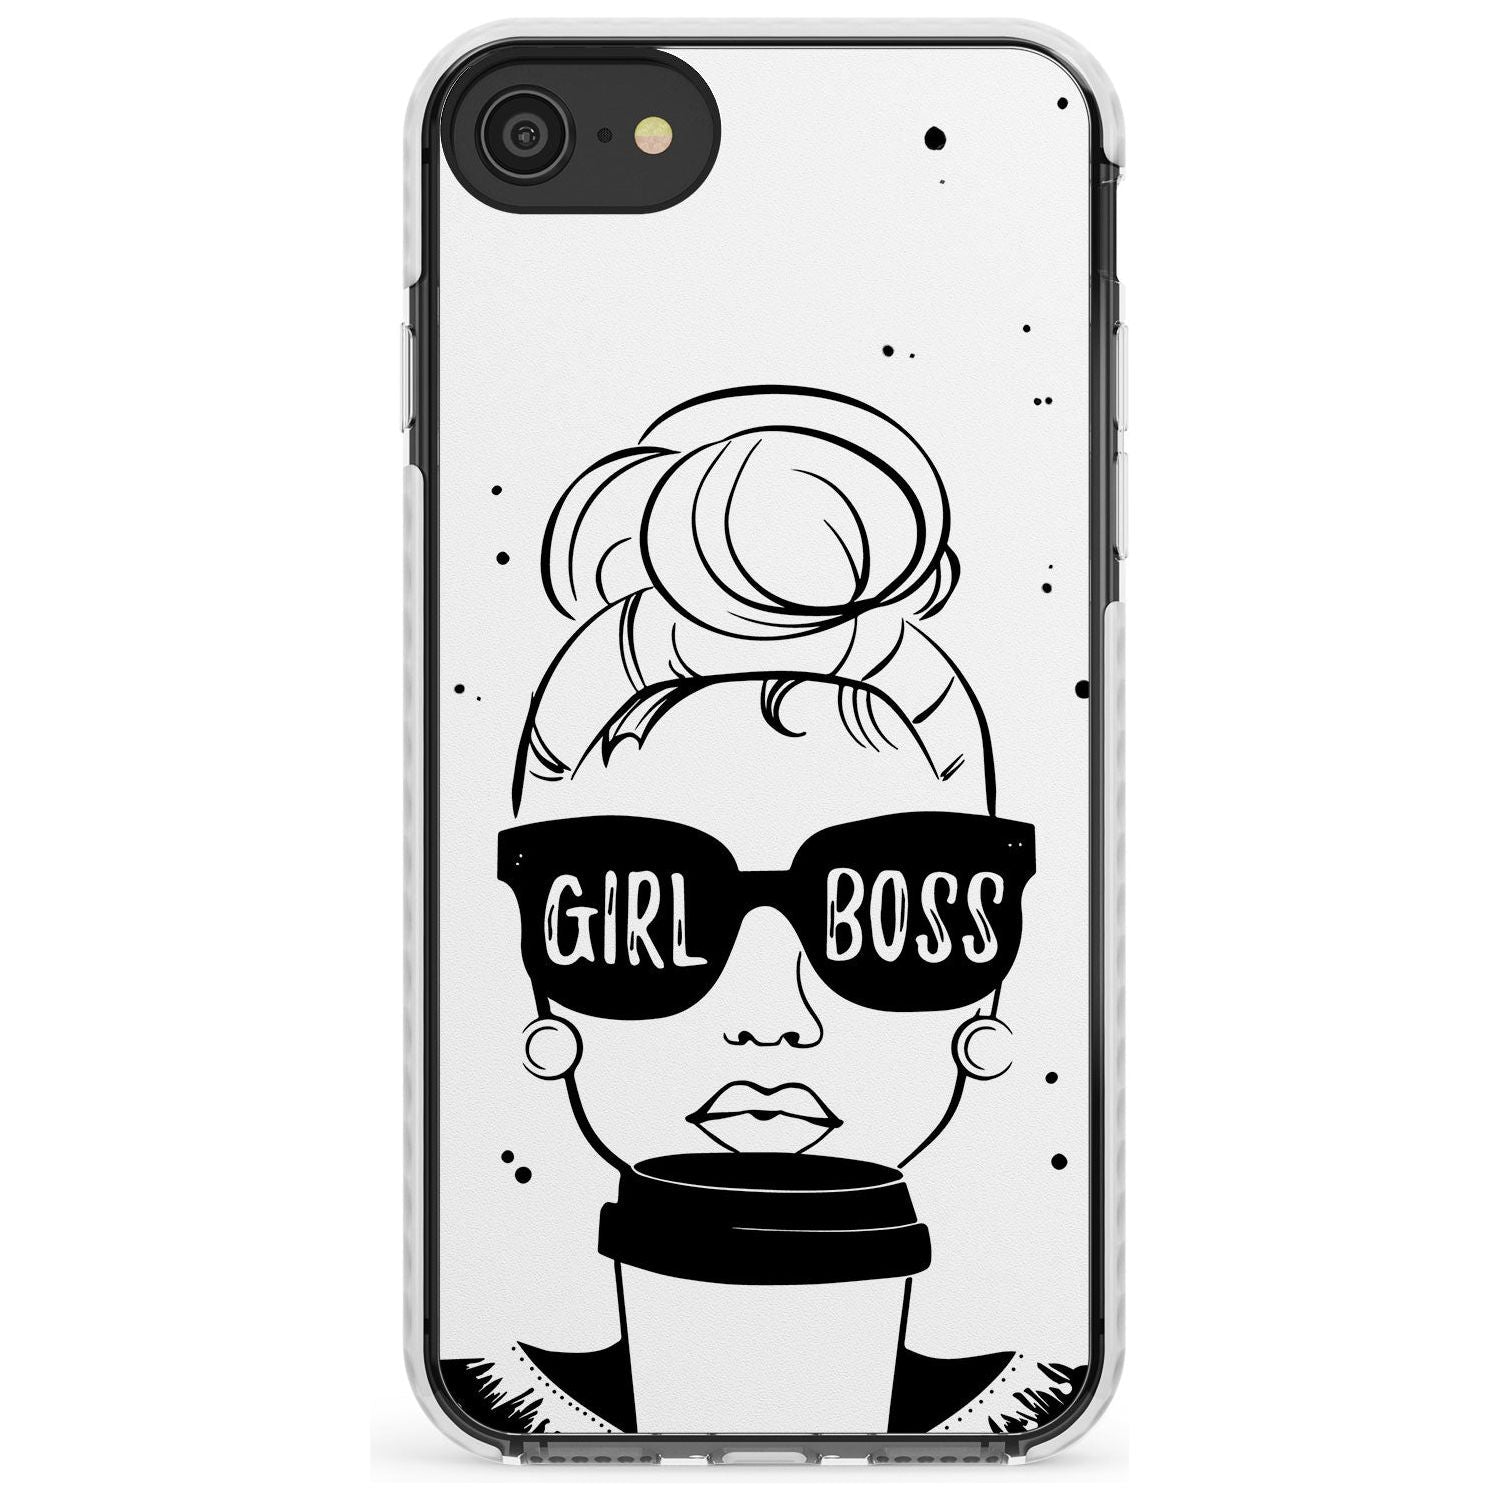 Girl Boss Impact Phone Case for iPhone SE 8 7 Plus